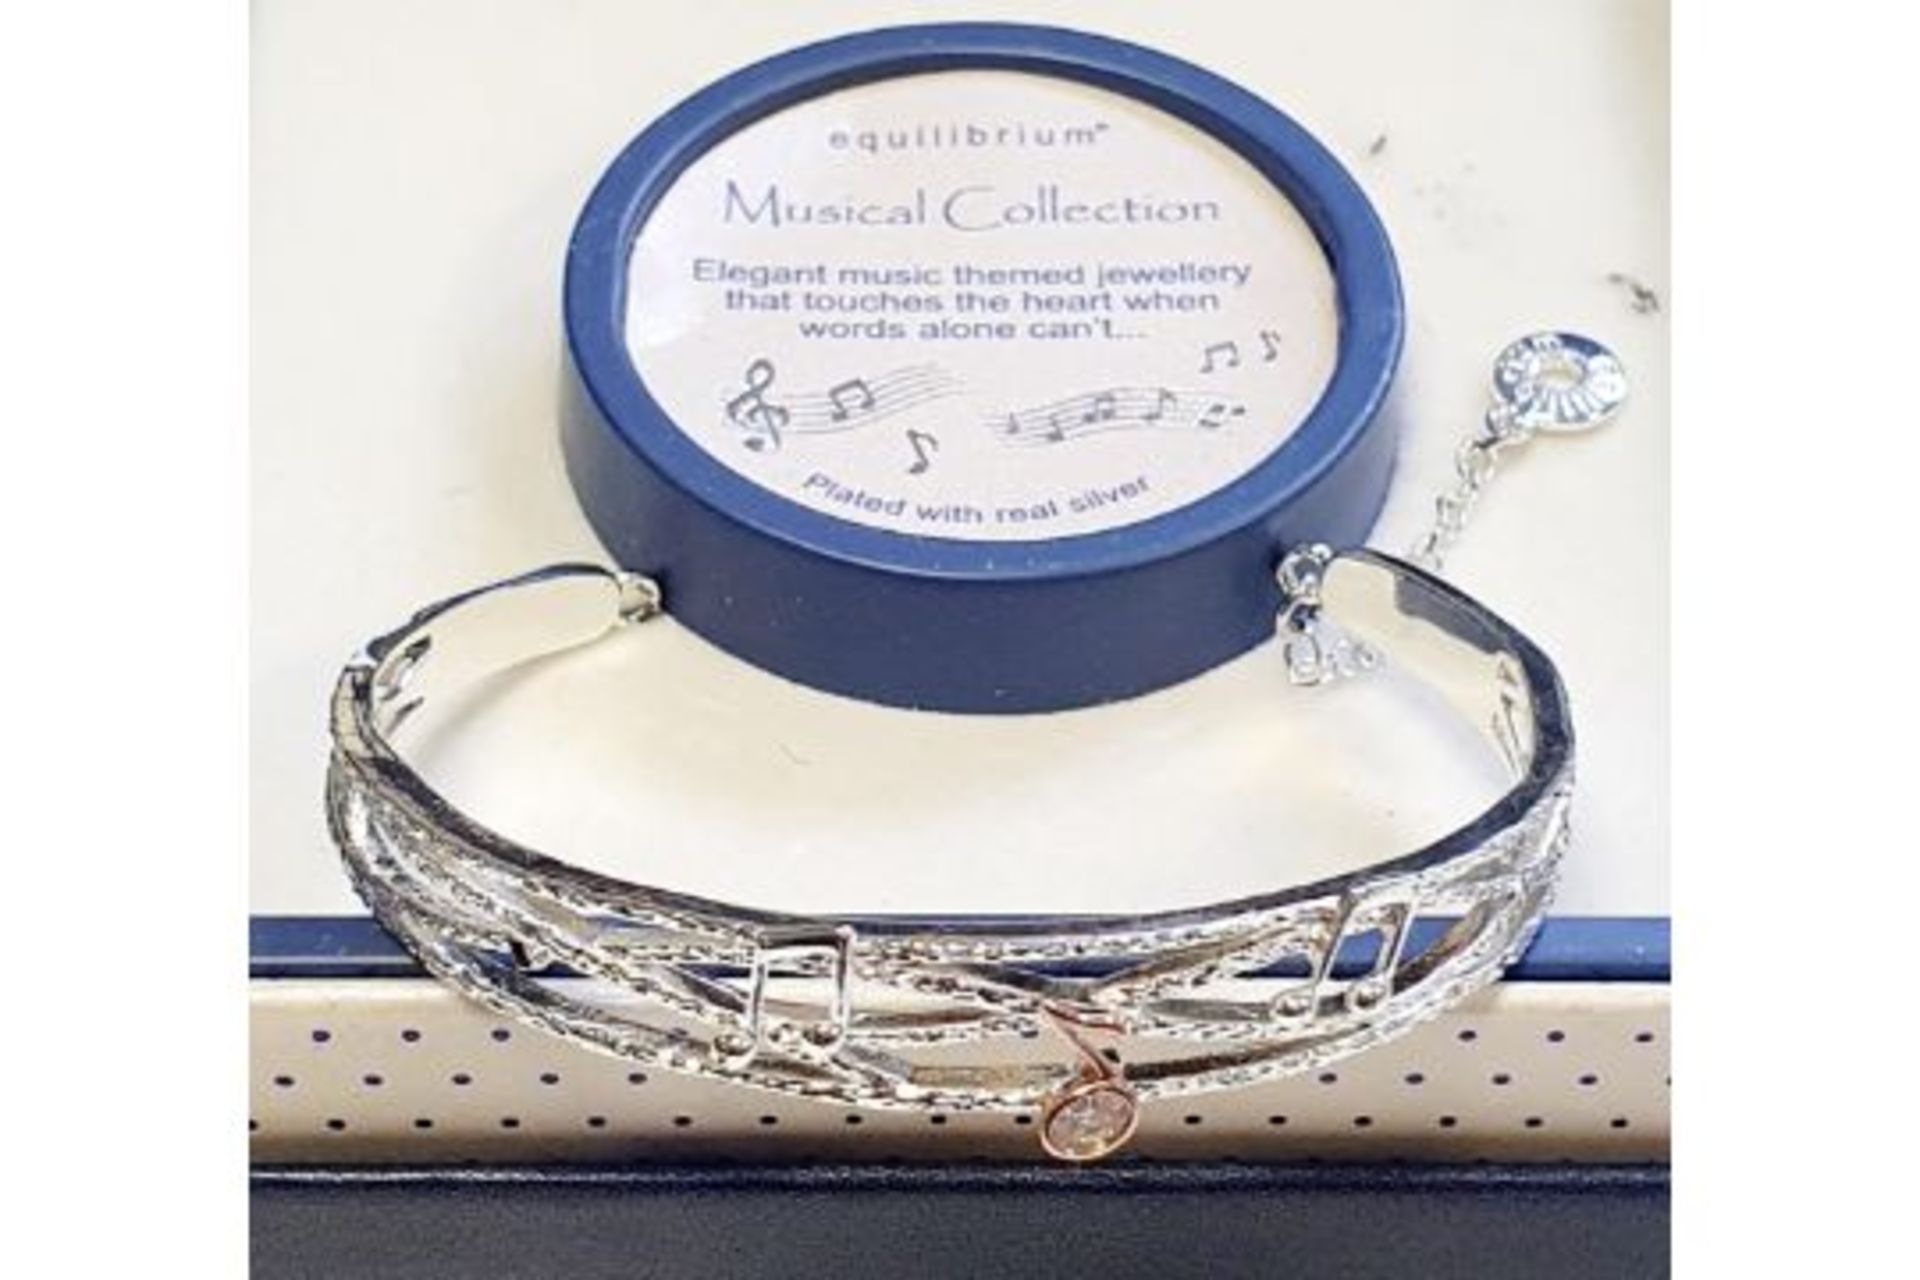 Beautiful Equilibrium Musical collection Bracelet PLated with real silver-boxed